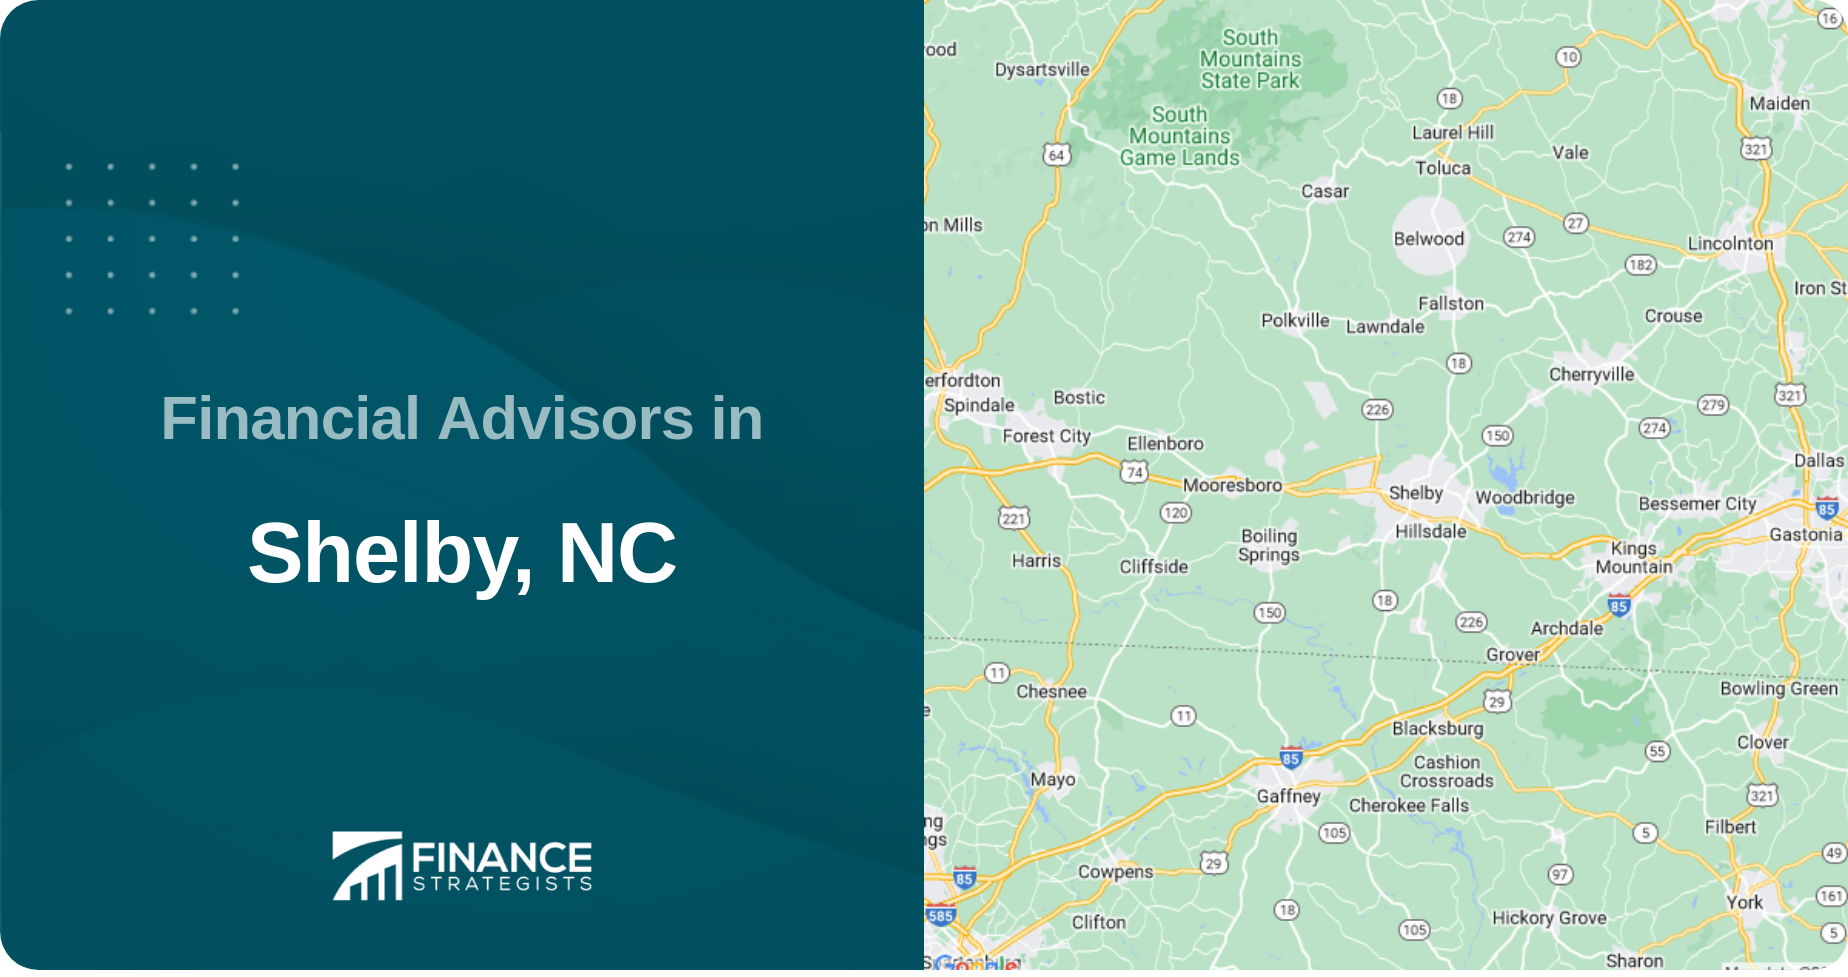 Financial Advisors in Shelby, NC